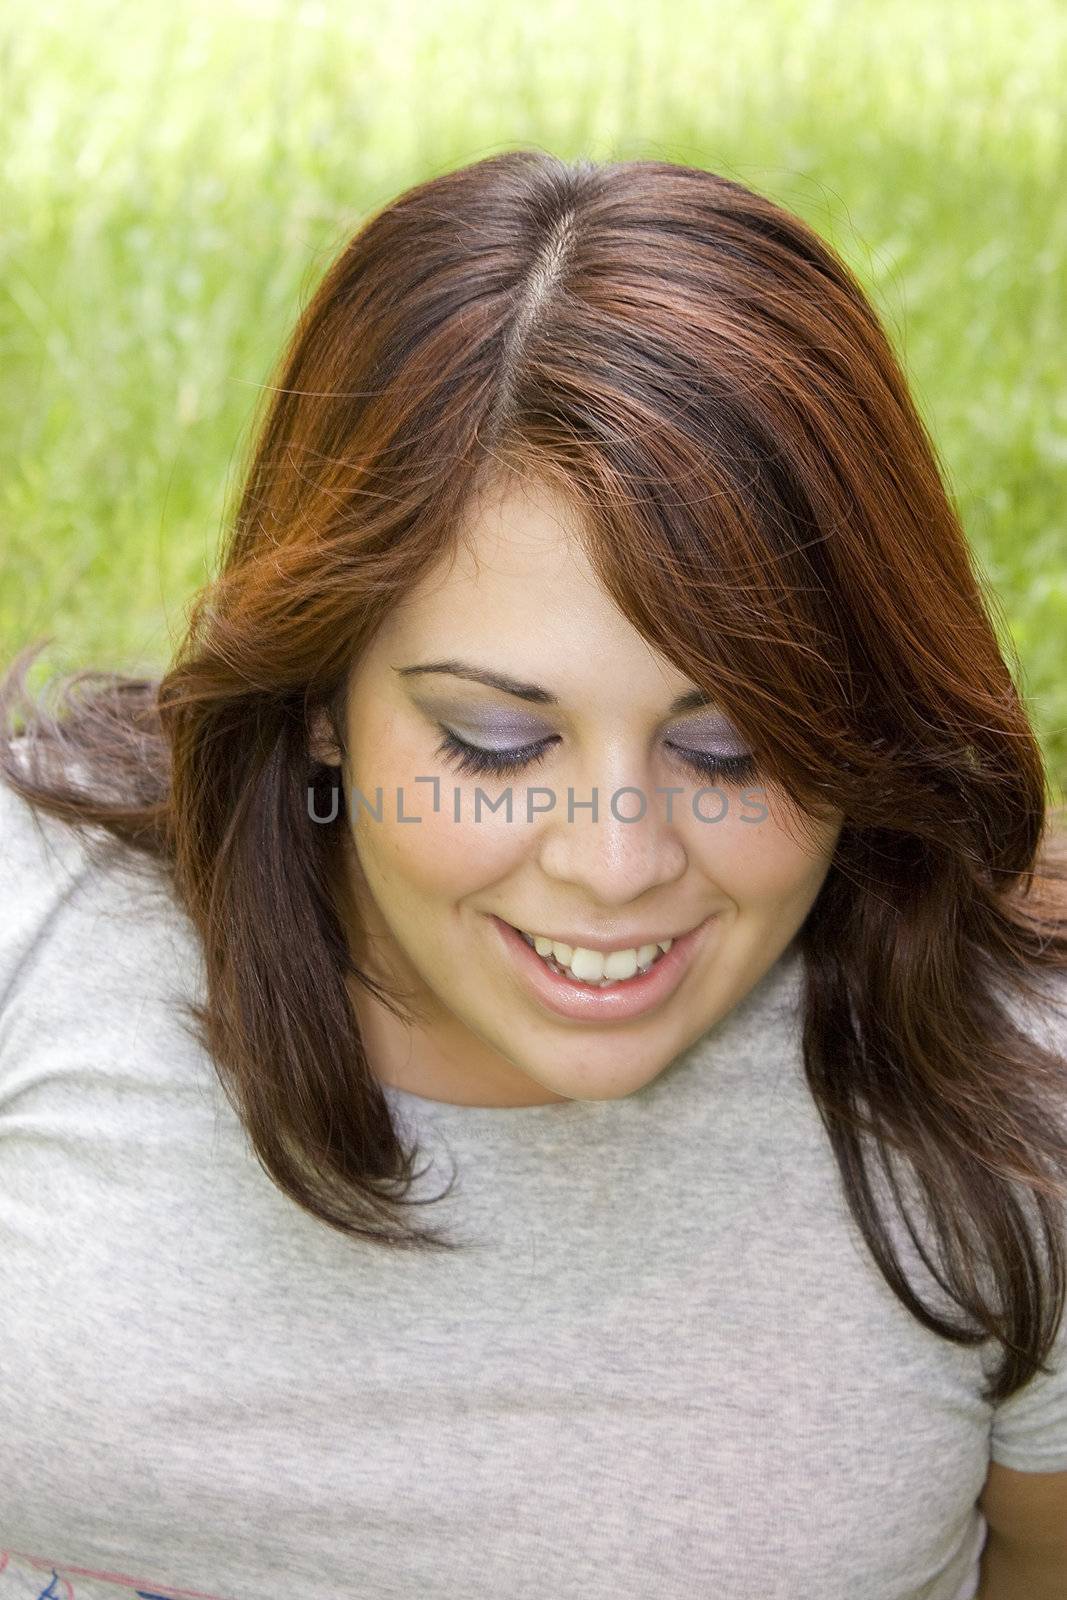 A cute Puerto Rican girl in her early twenties with red highlights in her hair.